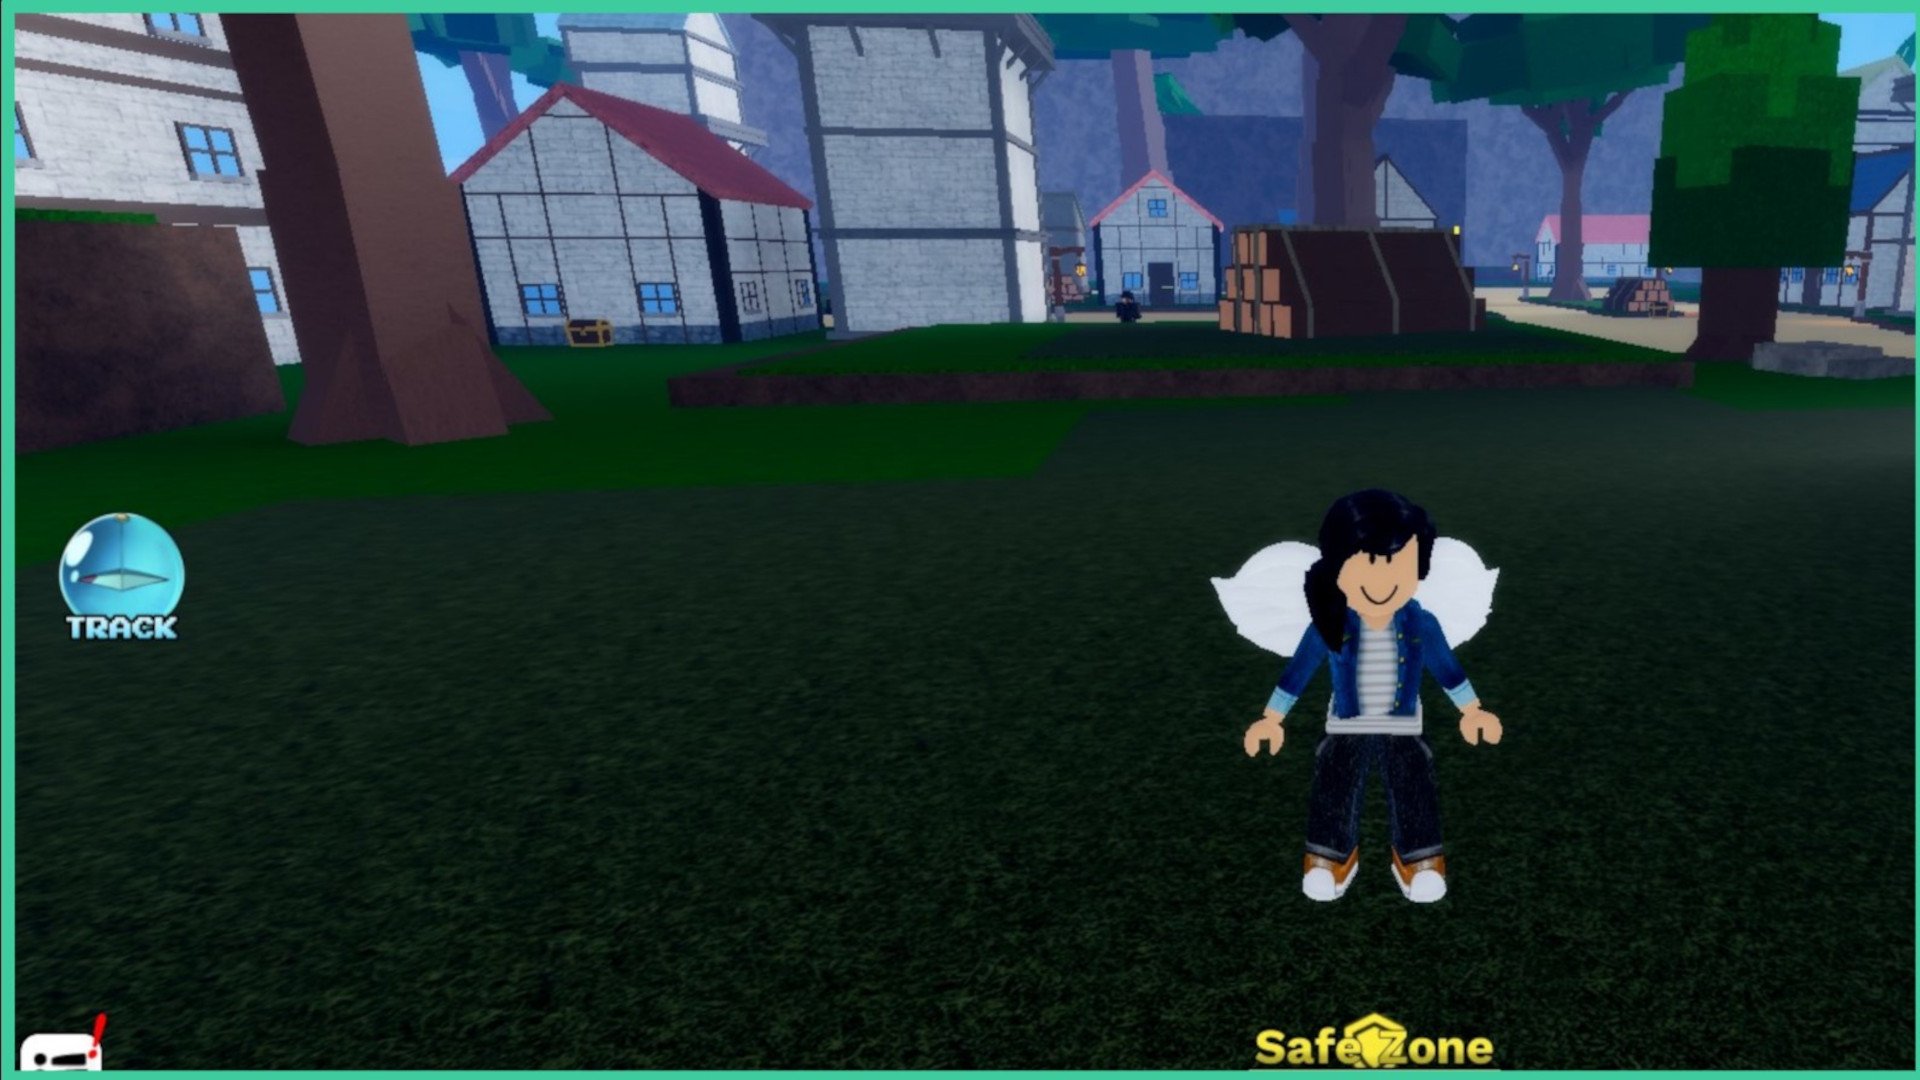 Feature image for a Demon Piece Map guide. Image shows a screenshot from Roblox, with a female Roblox character who has wings, standing on grass with buildings behind her.